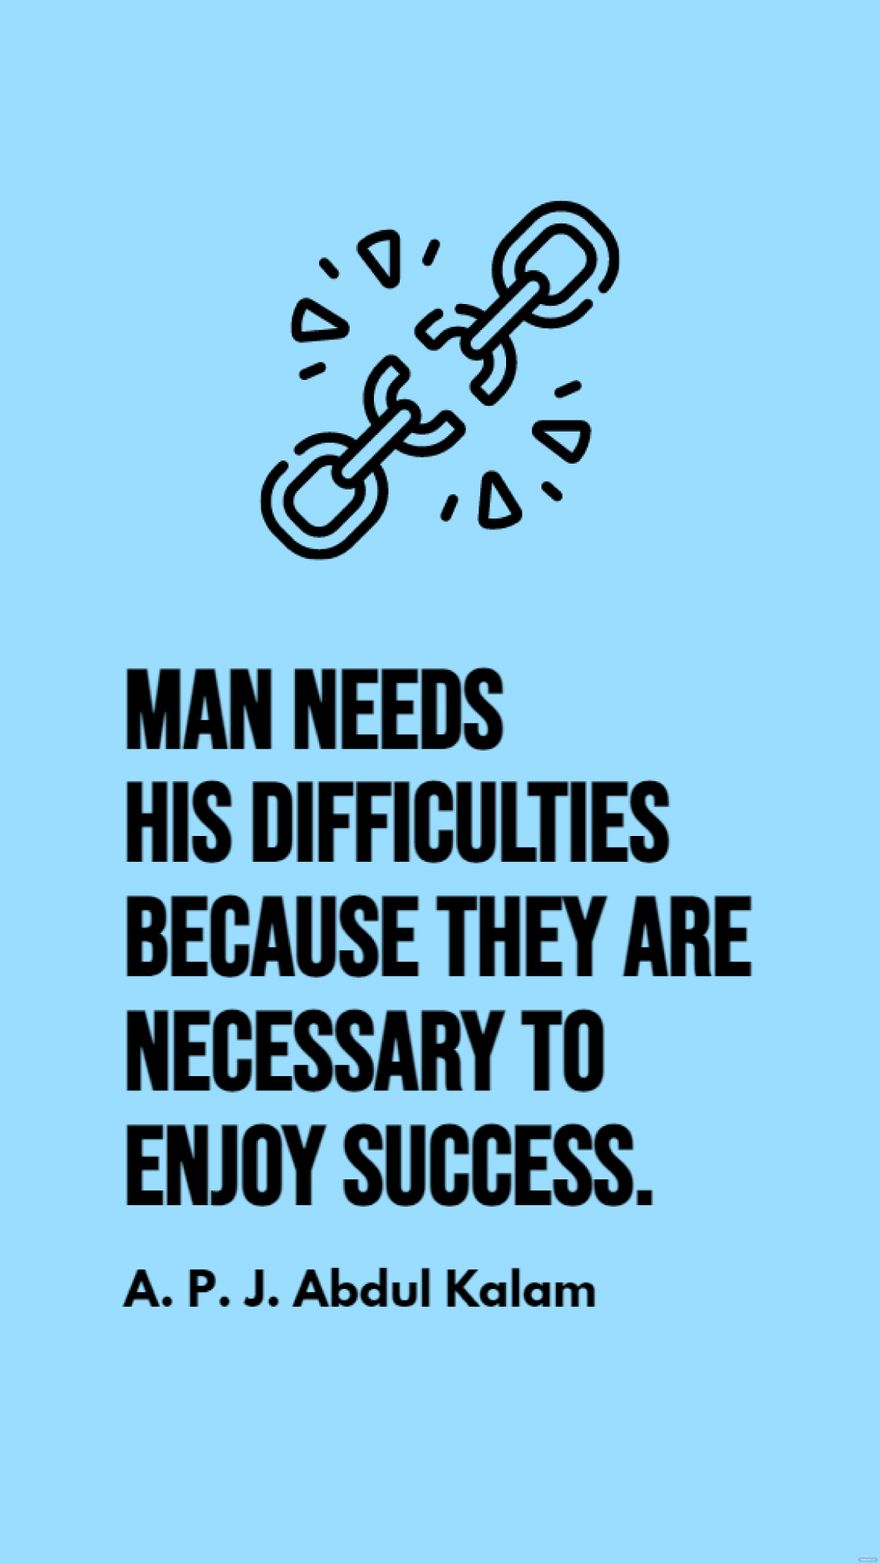 A. P. J. Abdul Kalam - Man needs his difficulties because they are necessary to enjoy success.